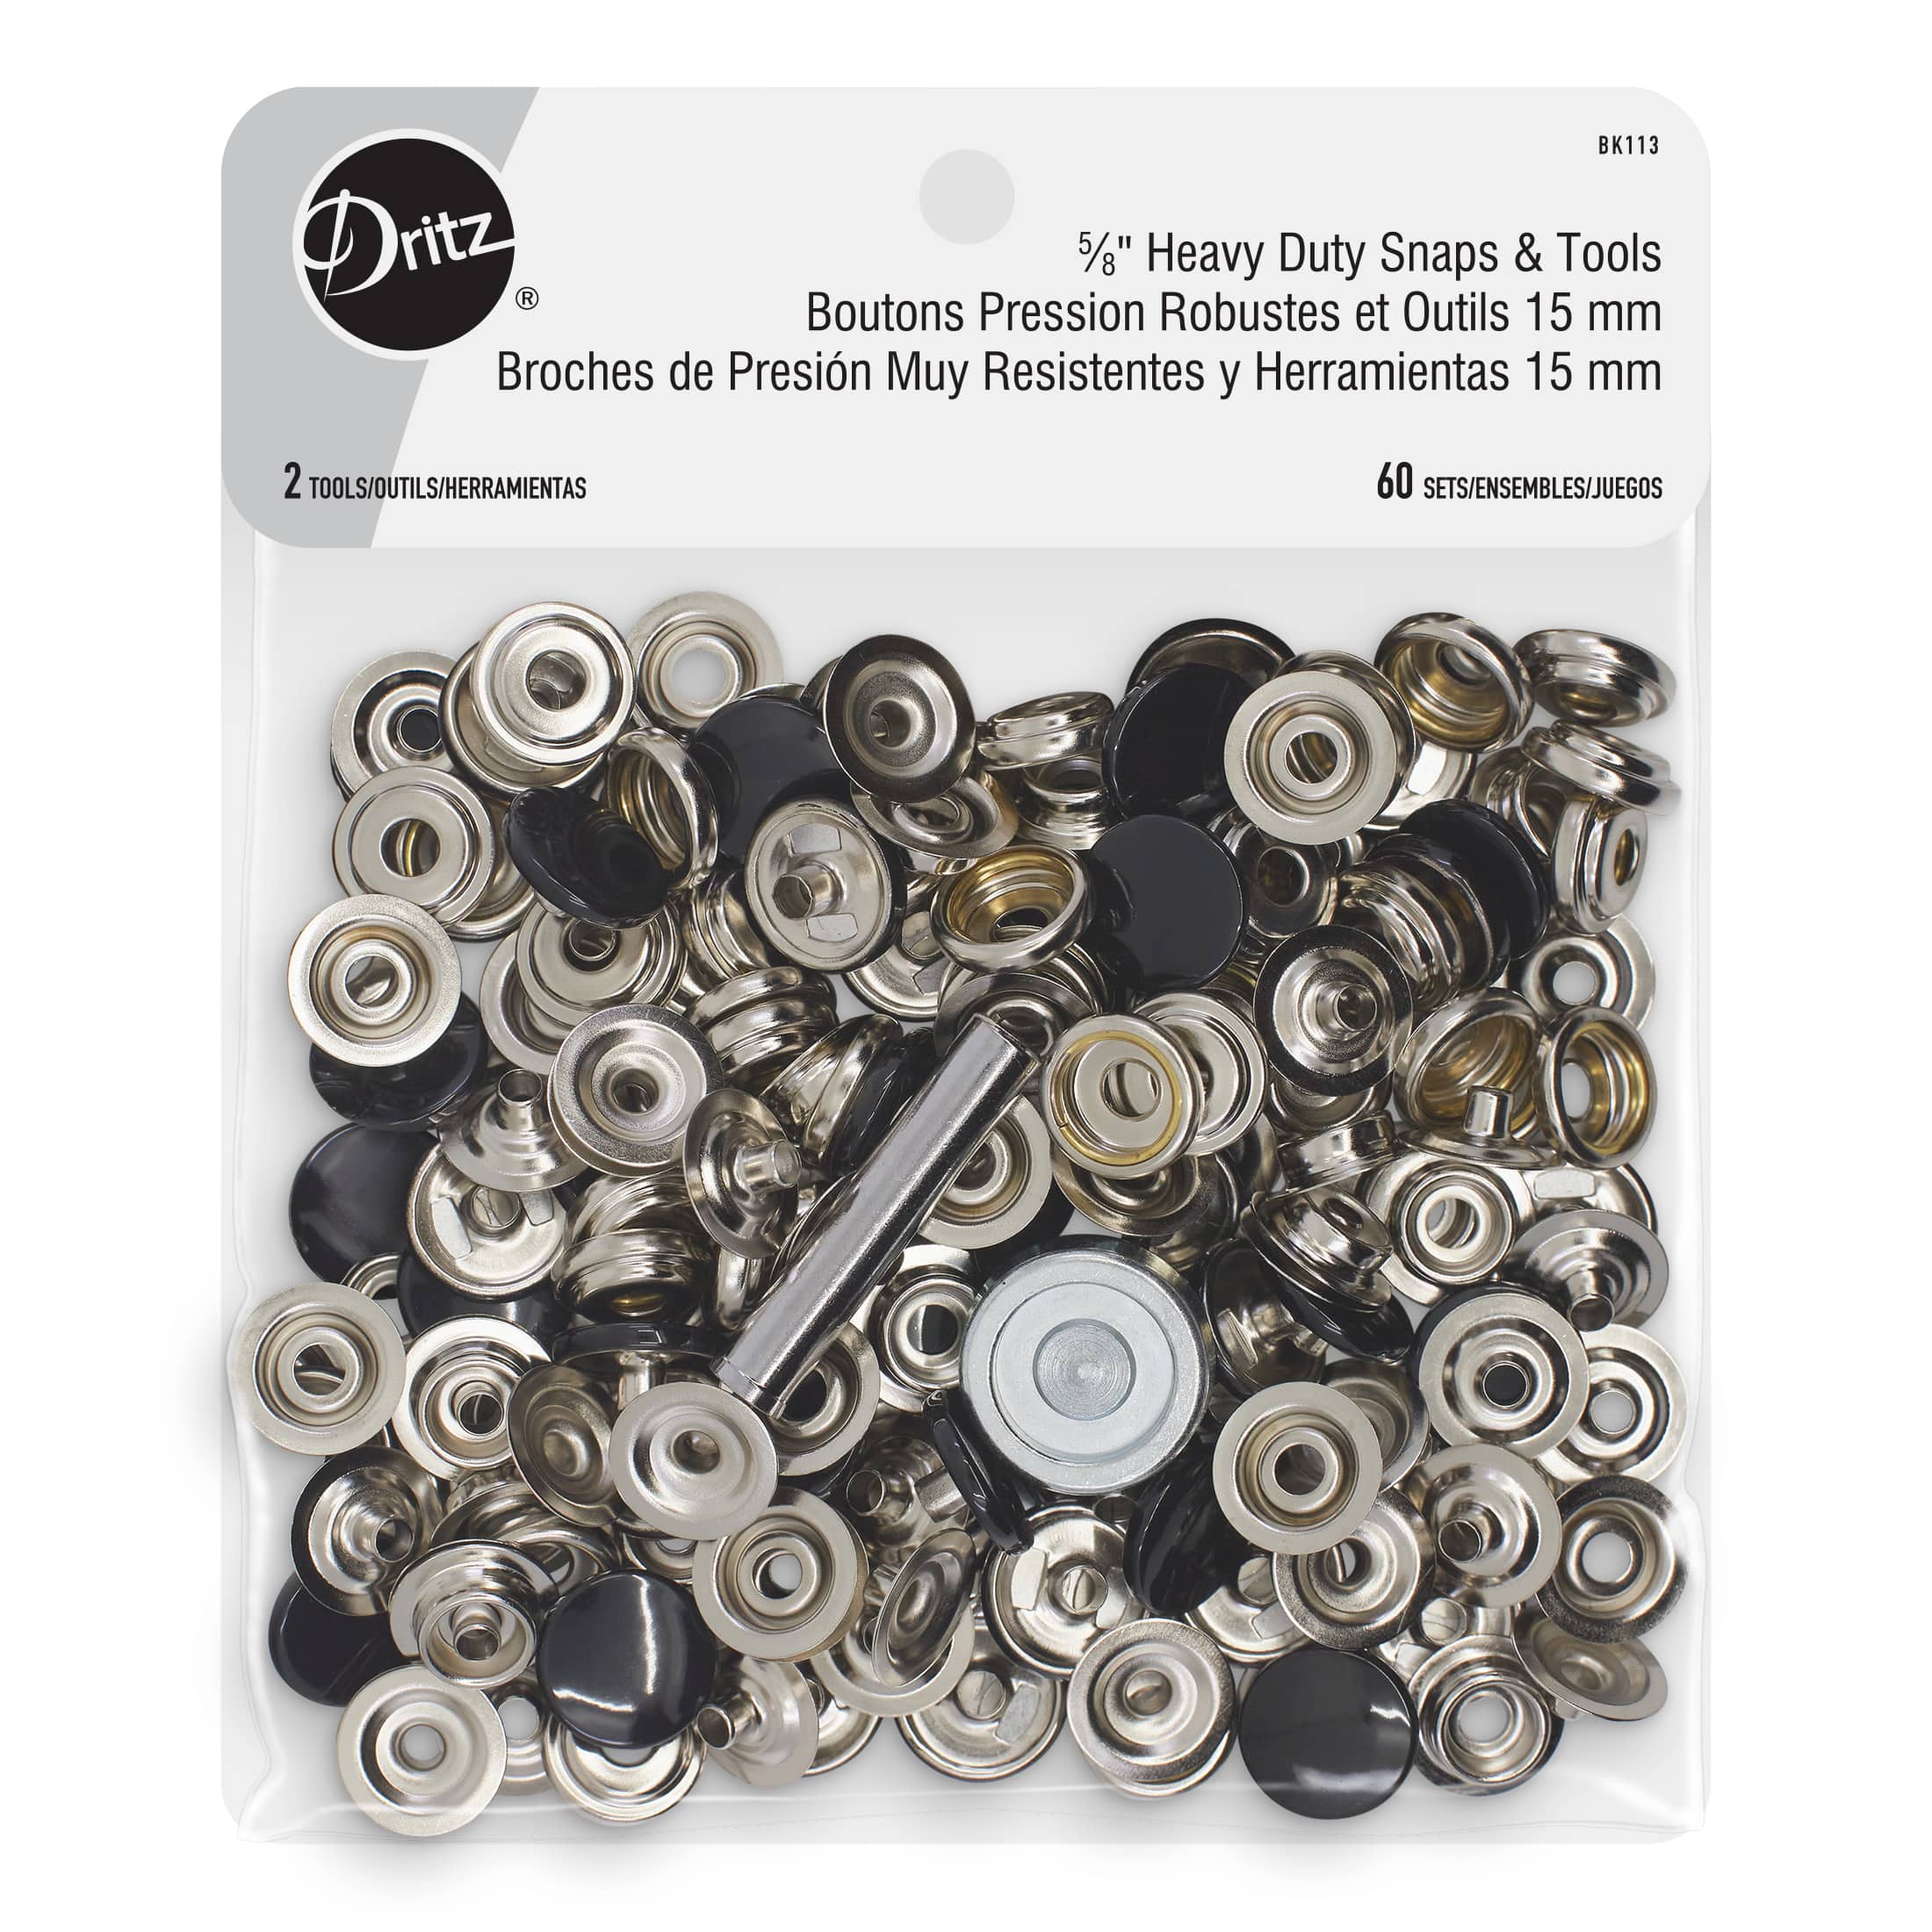 Inton 60 Sets 15mm 5/8 Mixed Heavy Duty Snap Fasteners Kit, Metal Snaps for Leather Crafts Sewing Repair Clothing Button Kit with Snap Installation Tool